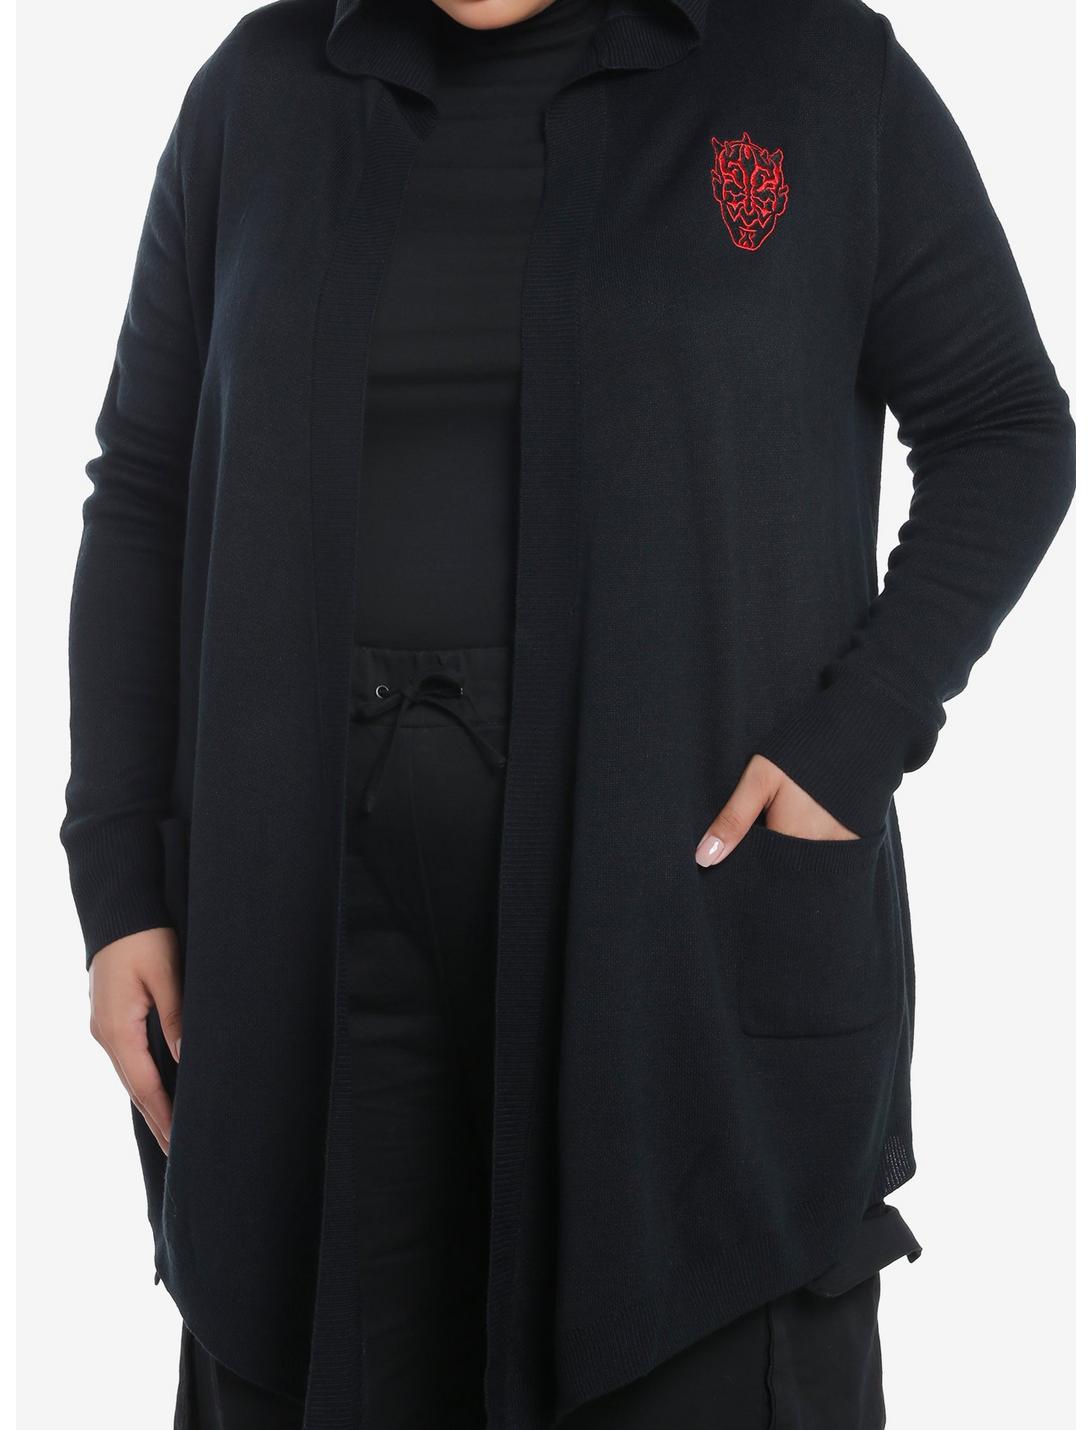 Her Universe Star Wars: The Clone Wars Darth Maul Hooded Cardigan Plus Size Her Universe Exclusive, MULTI, hi-res